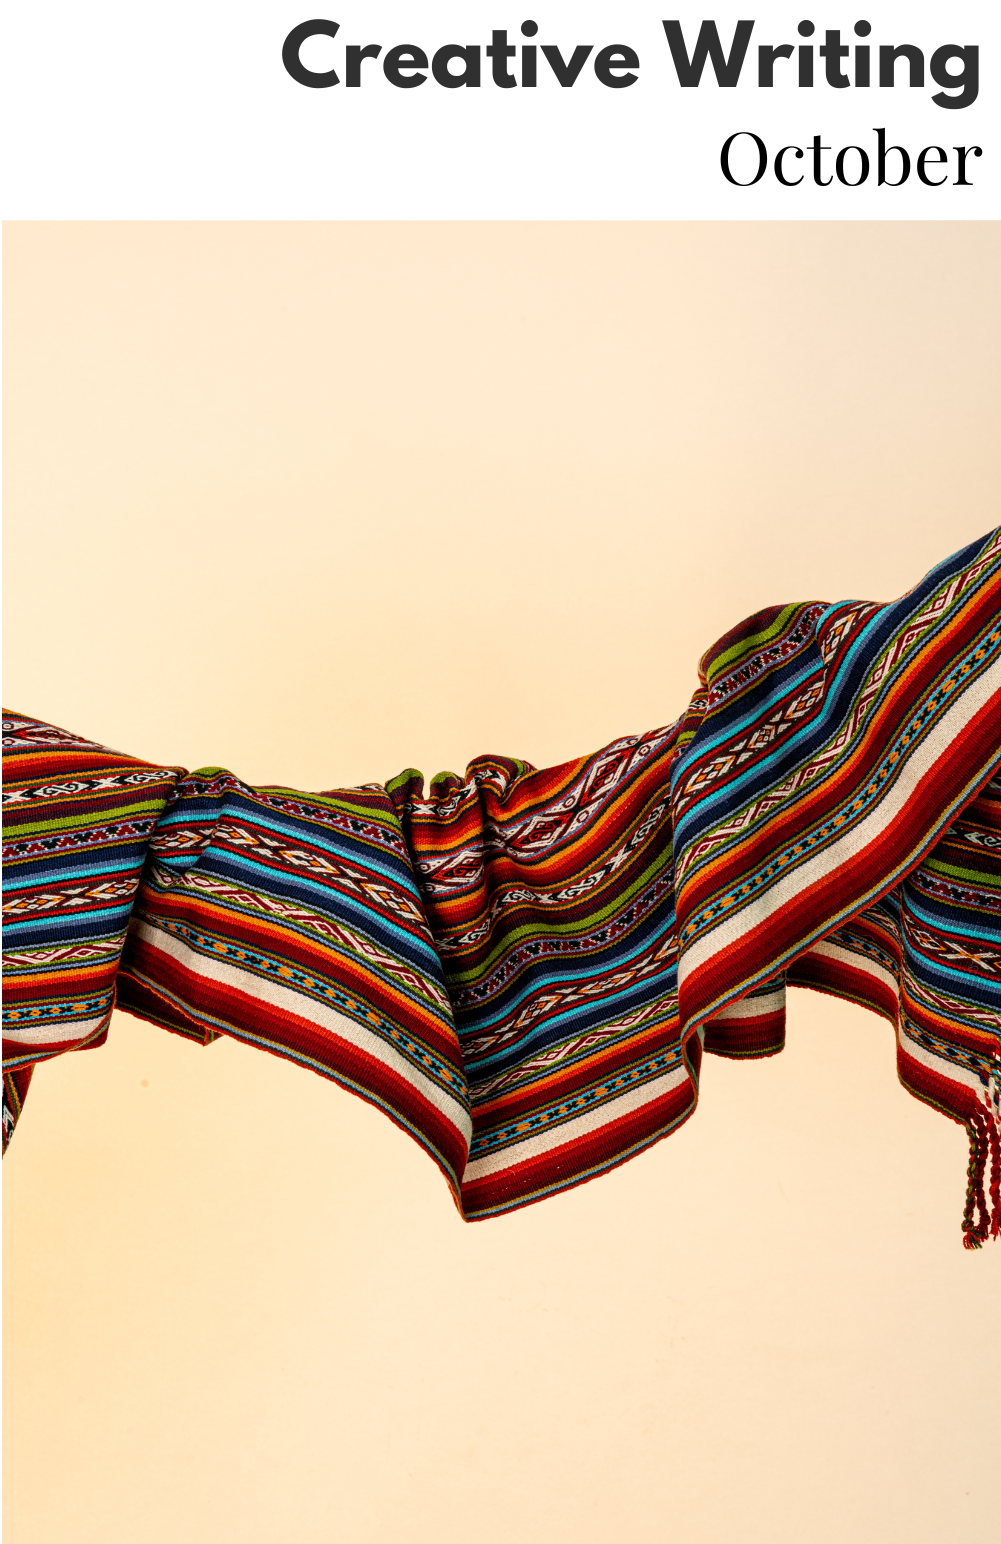 Image of some serape wraps hanging on a clothing line. 